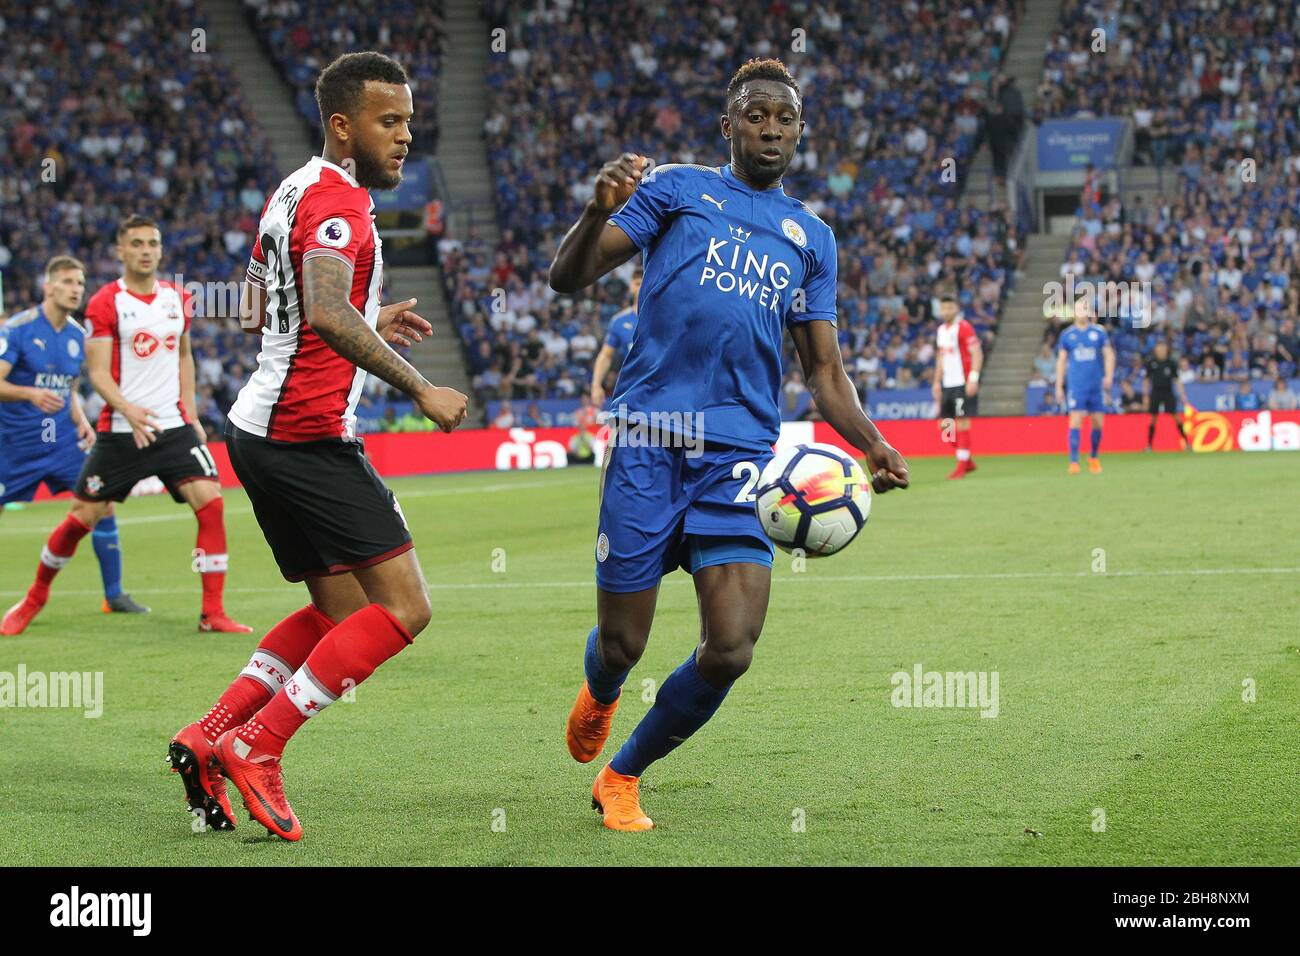 LEICESTER, ENGLAND  Ryan Bertand of Southampton and Wilfred Ndidi of Leicester City during the Premier League match between Leicester City and Southampton at the King Power Stadium, Leicester on Thursday 19th April 2018. (Credit: Mark Fletcher | MI News) Stock Photo